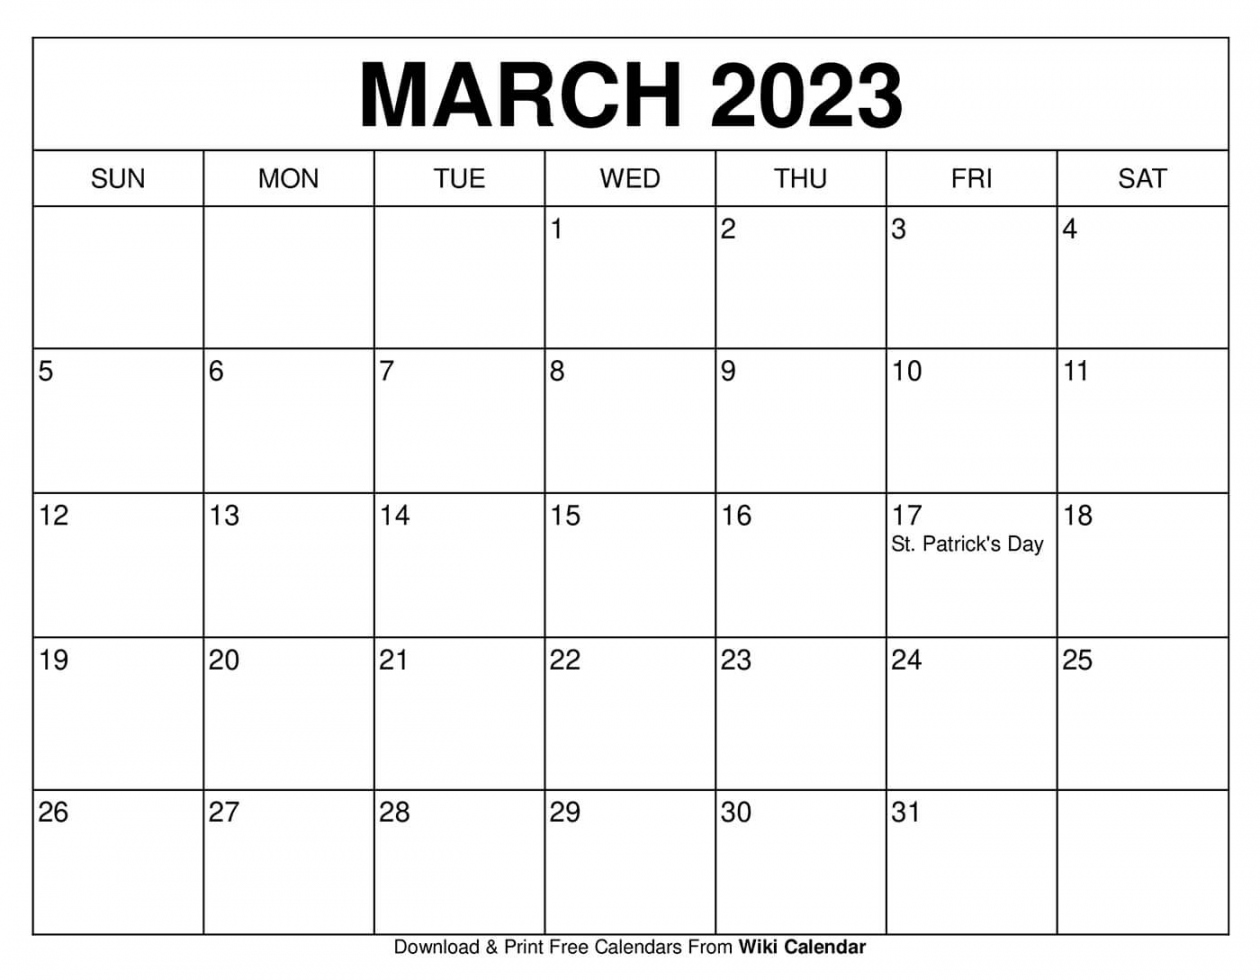 Free Printable March  Calendar Templates With Holidays - FREE Printables - Free Printable March Calendar 2023